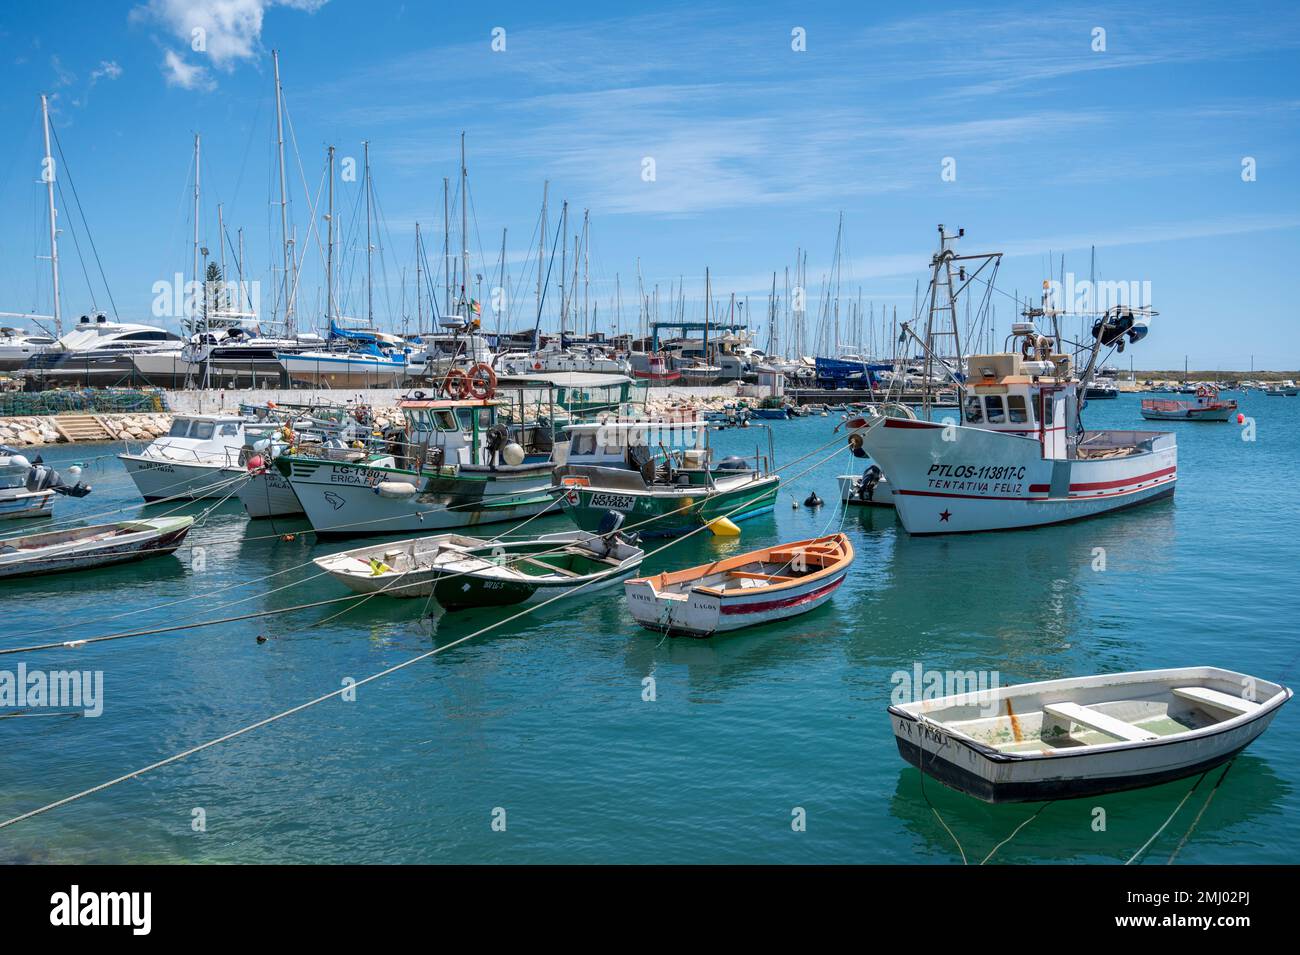 Fishing boats in the harbour or marina at Lagos Algarve Portugal Stock Photo